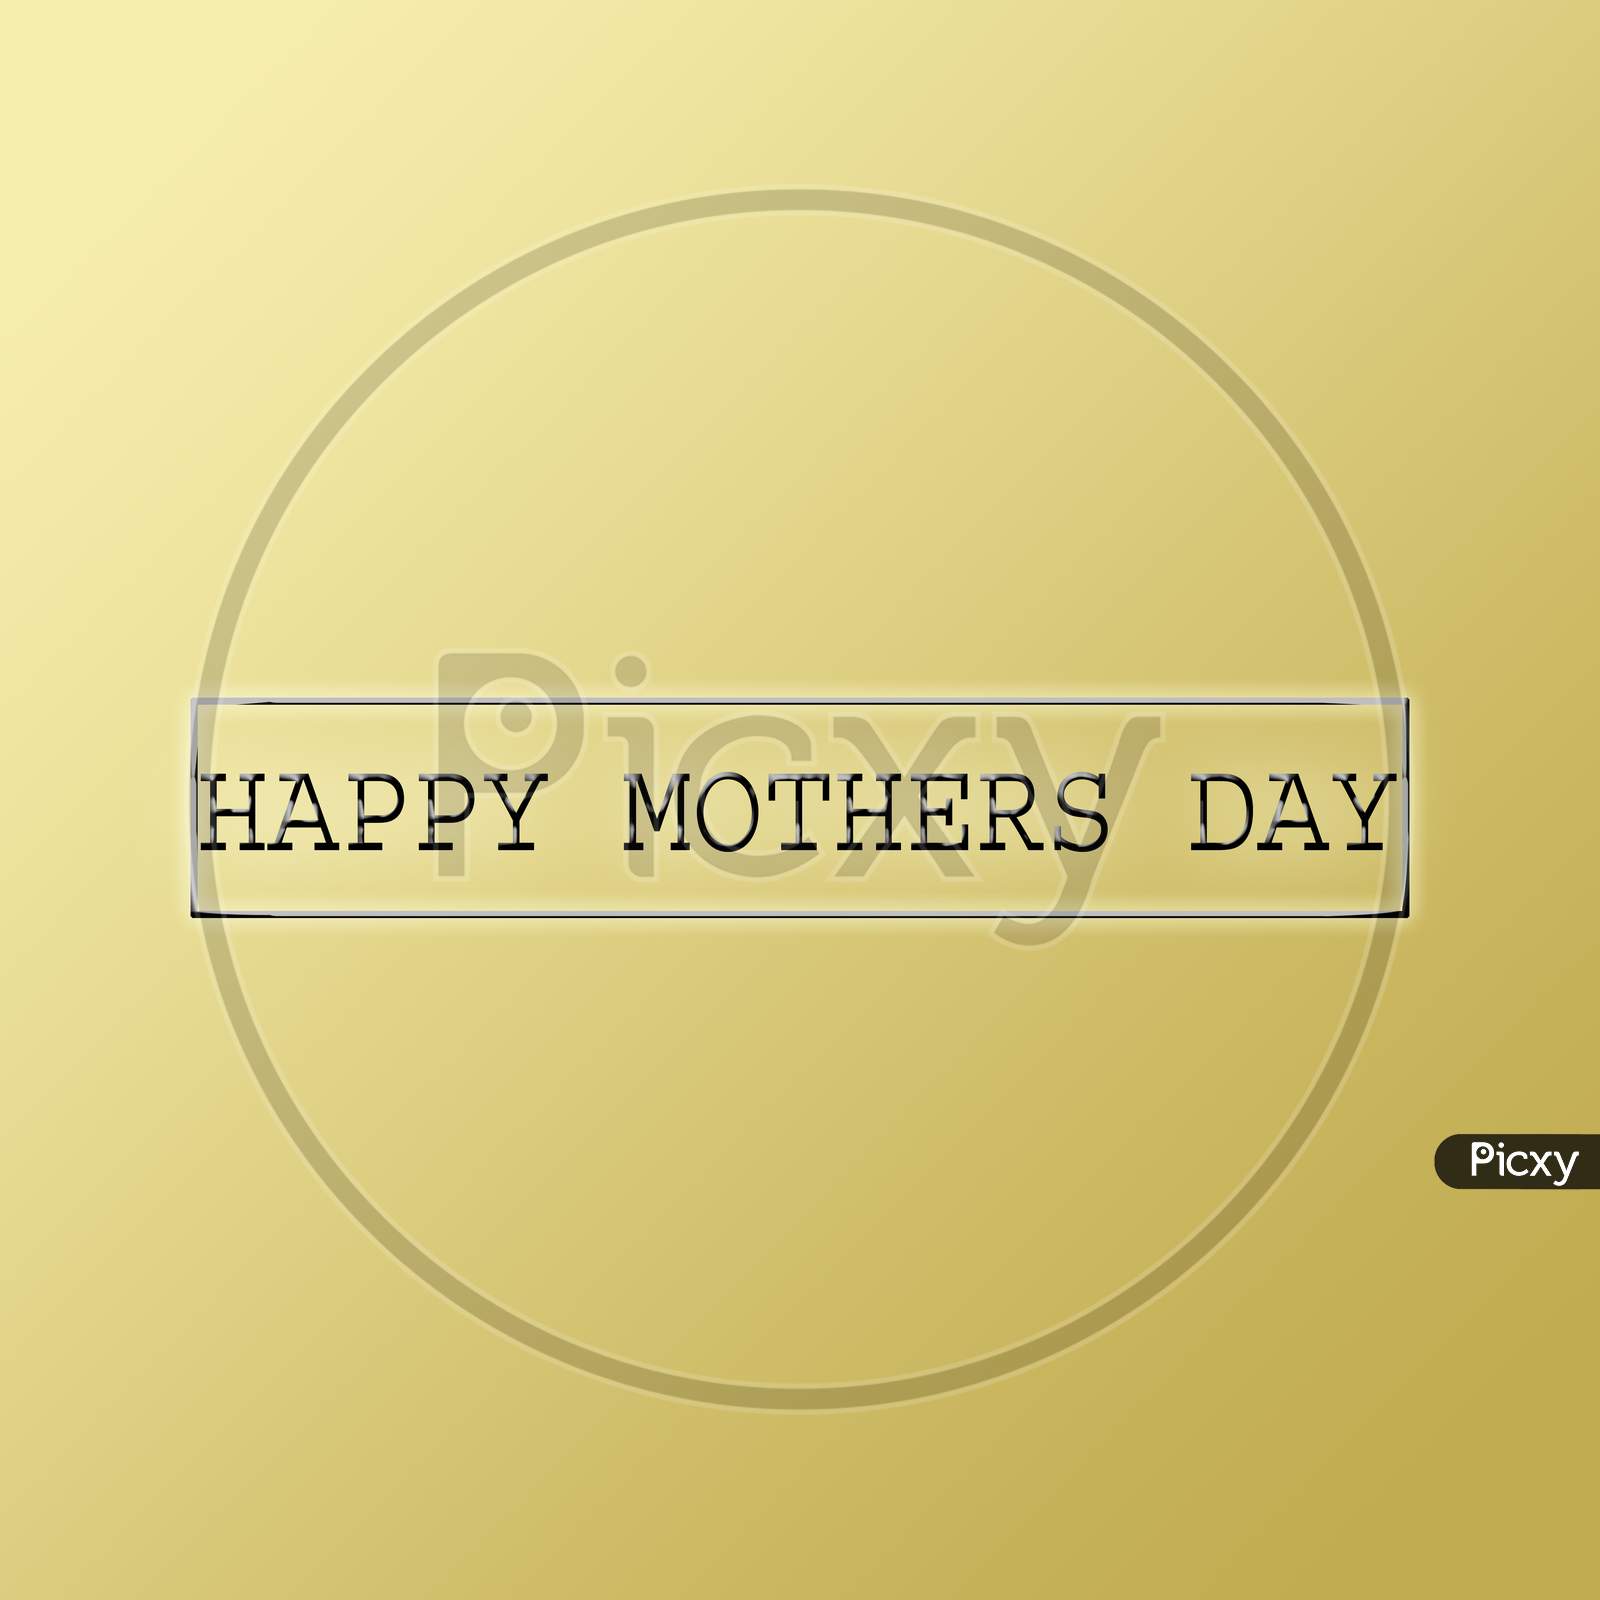 Happy mothers day text with background and color